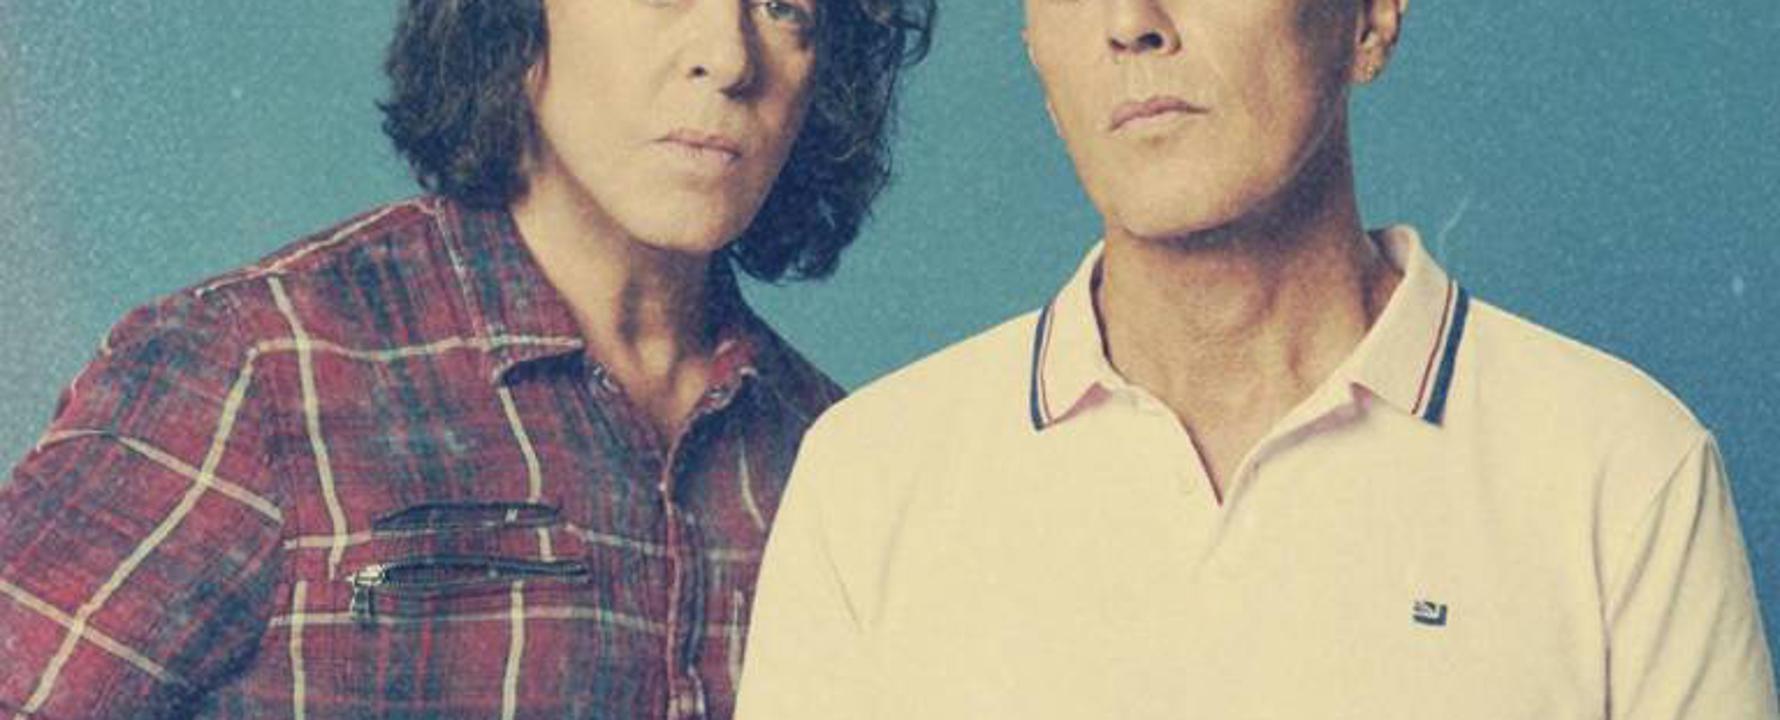 Promotional photograph of Tears for Fears.